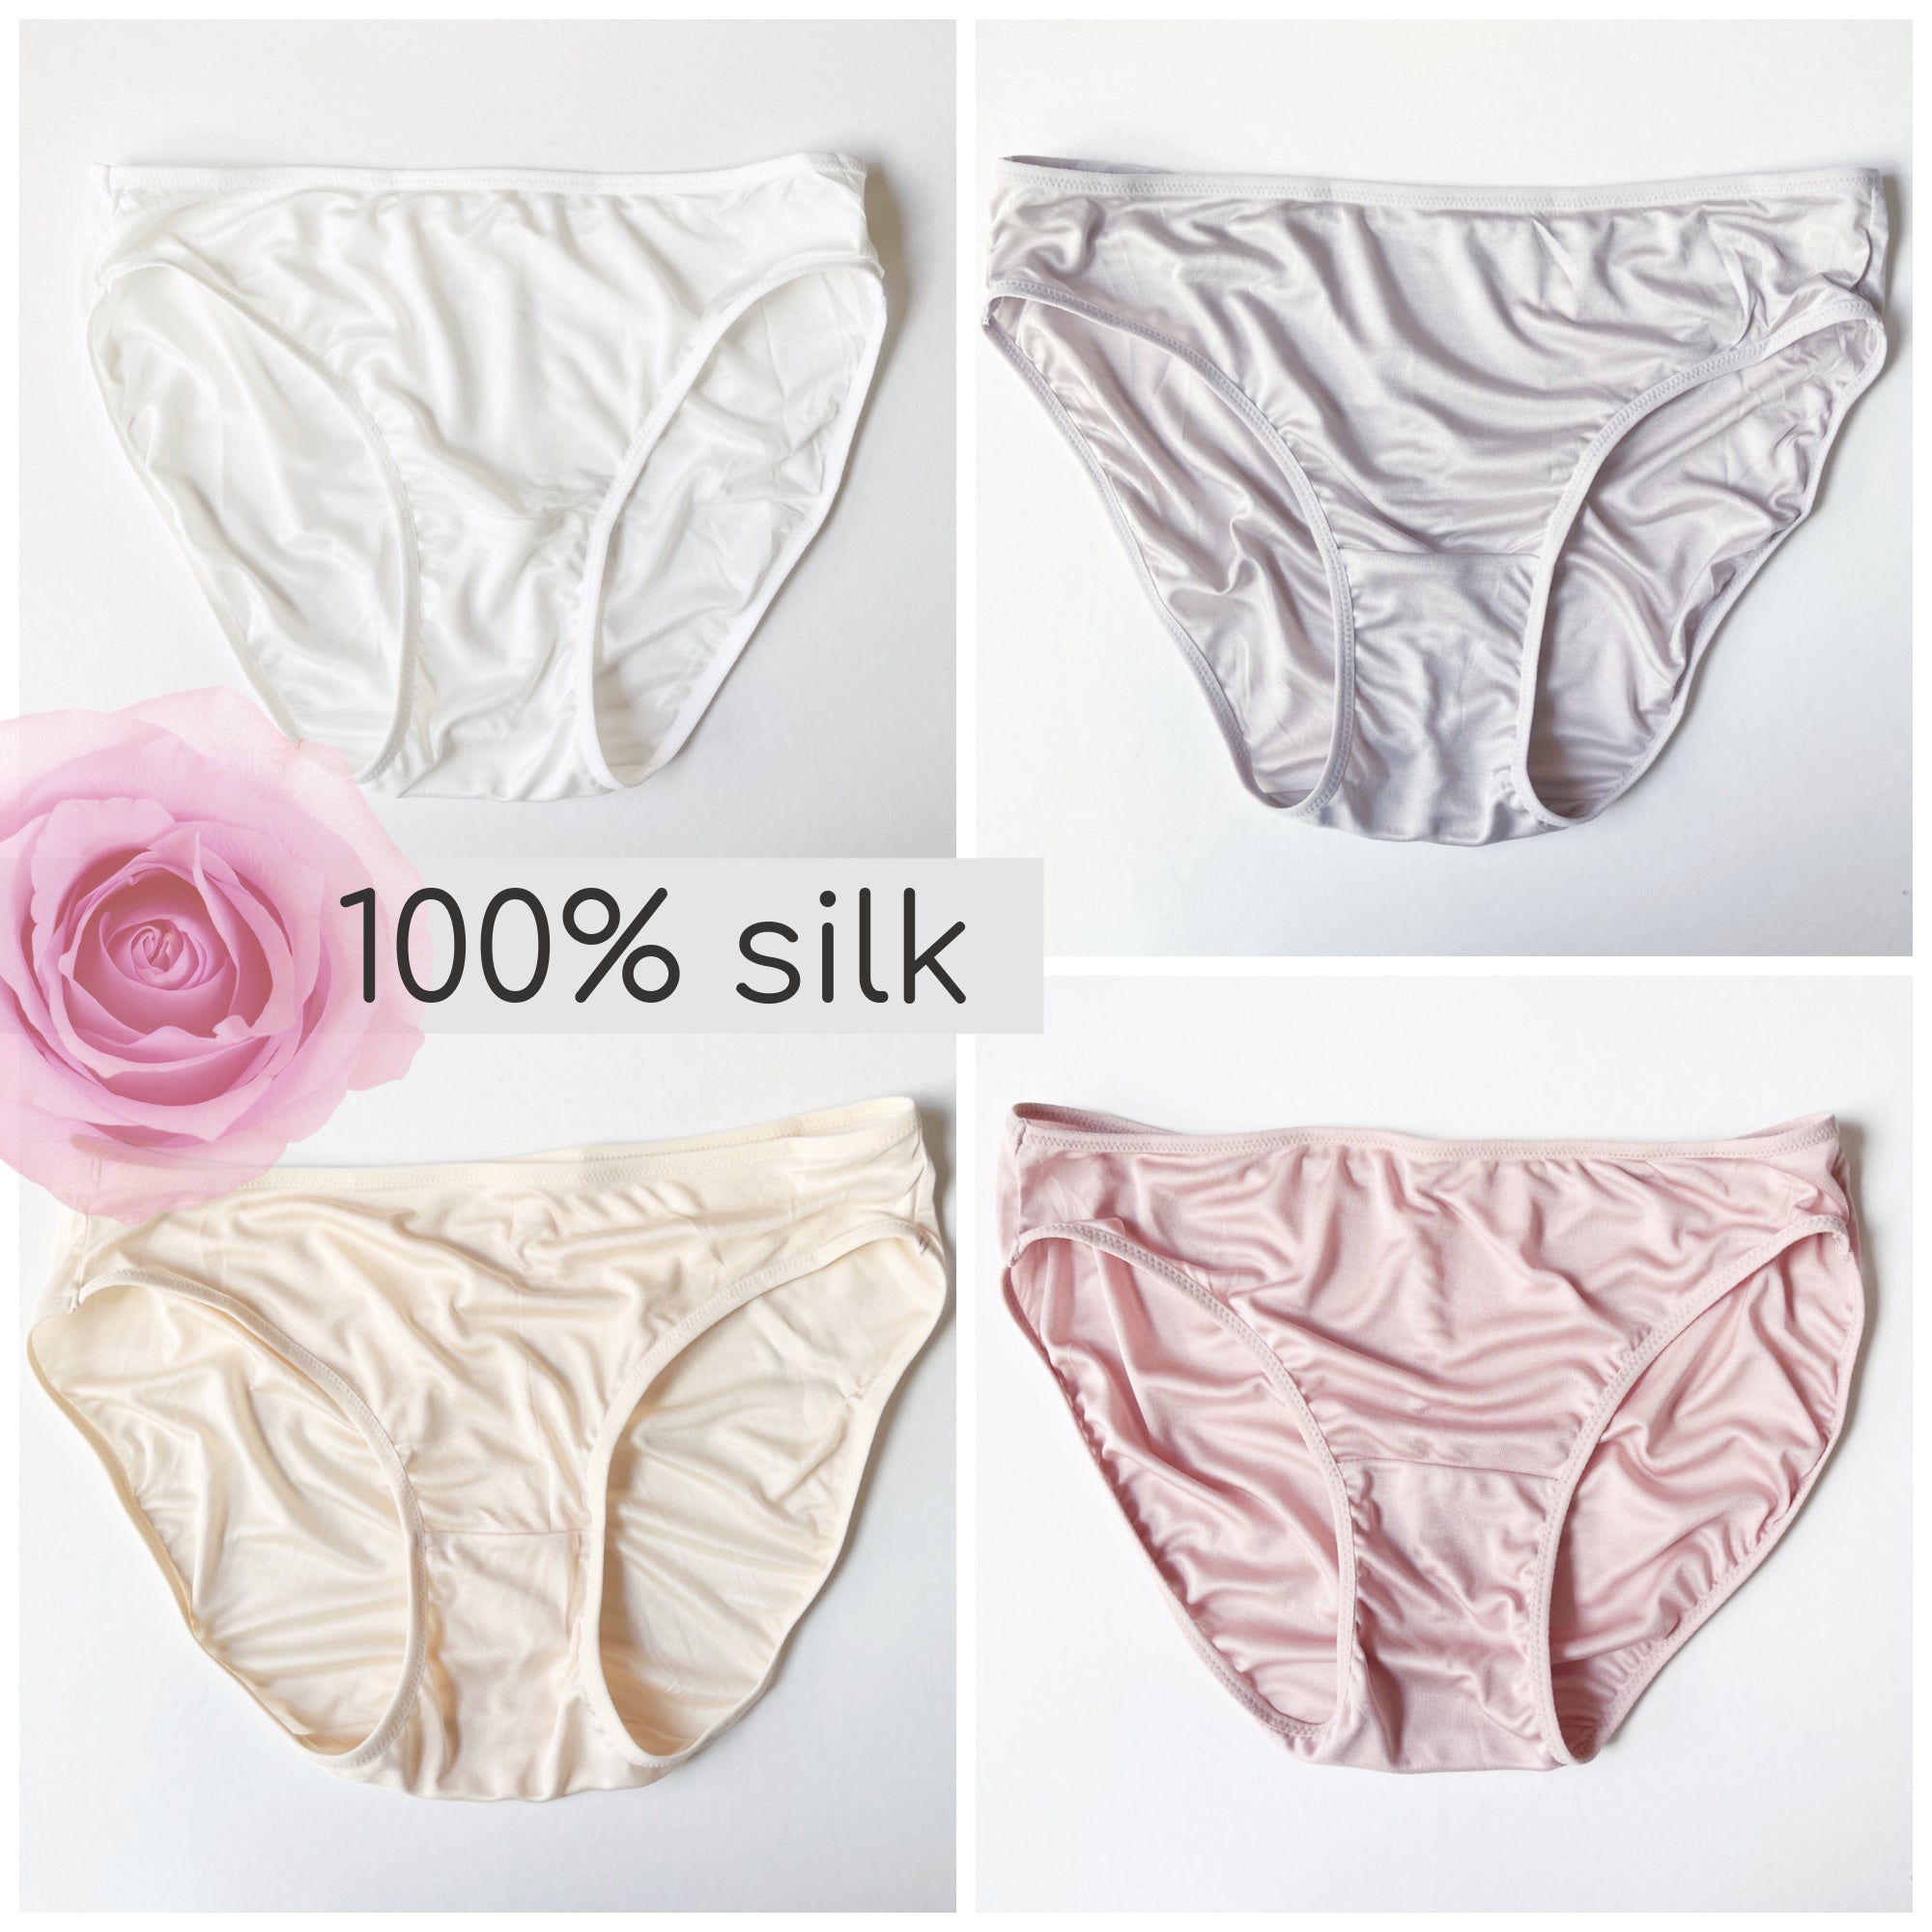 Why You Need a Silk Underwear Made From 100% Silk? – SPOIL ME SILK